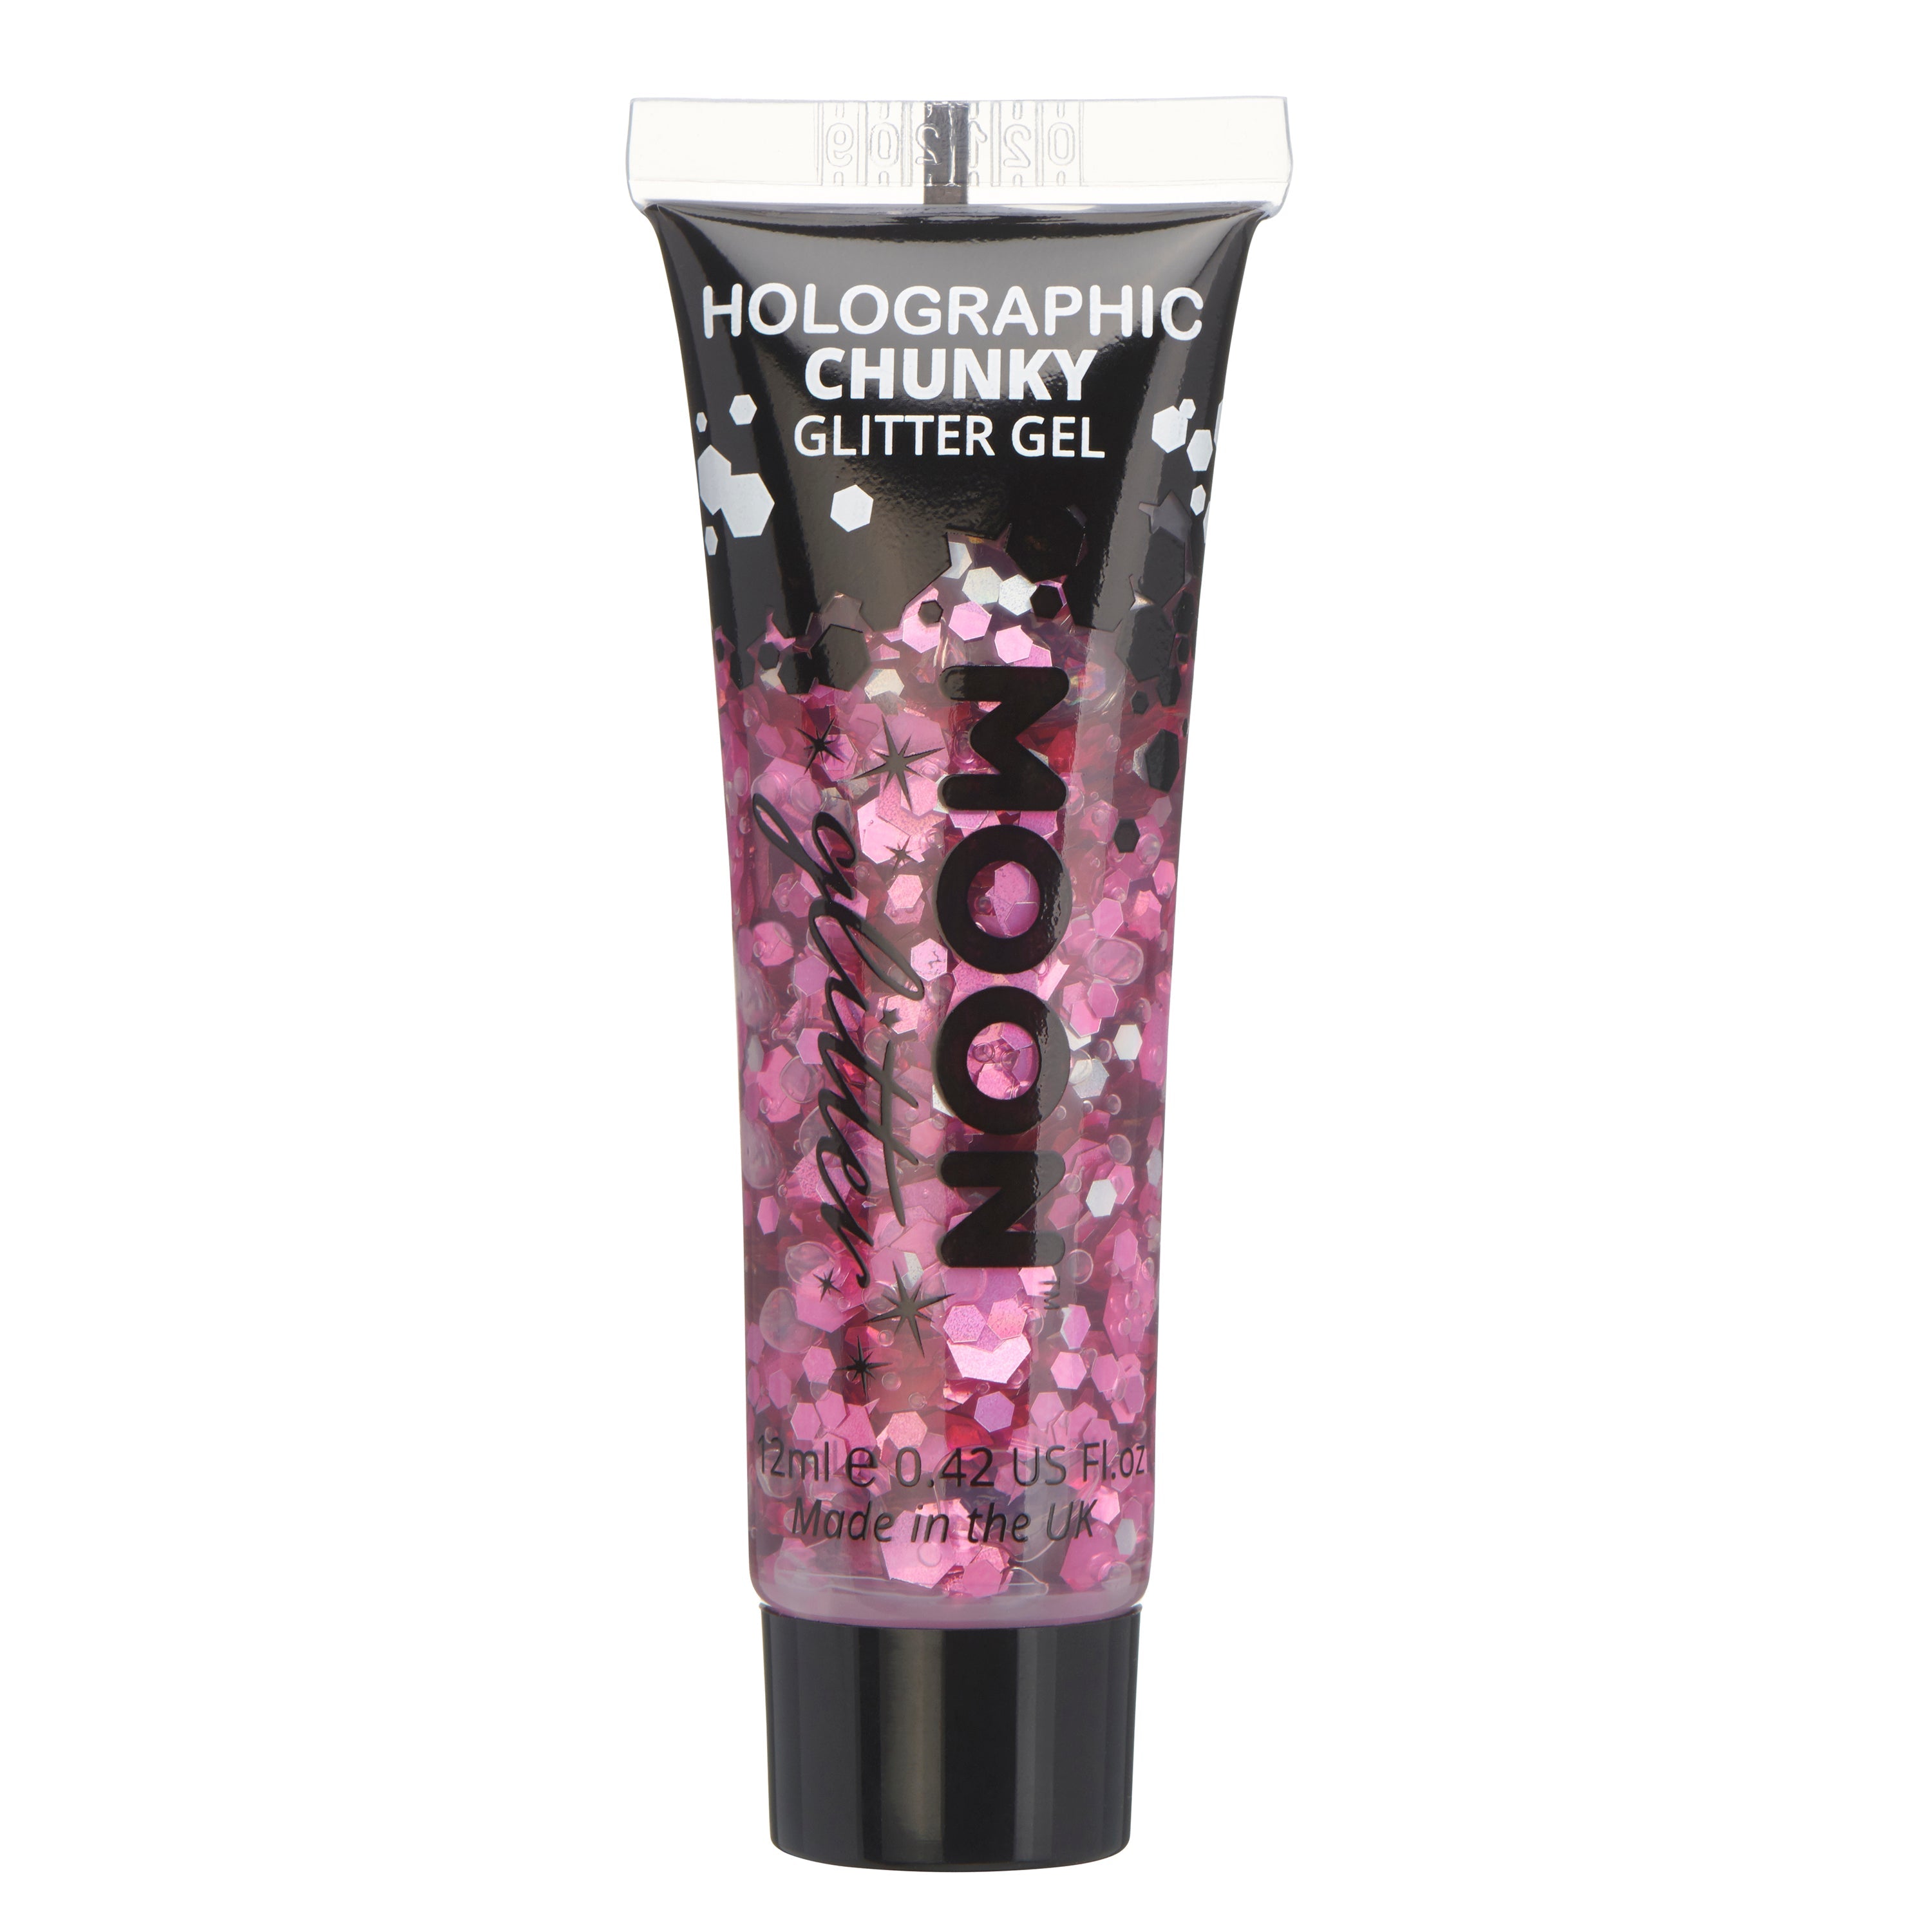 Pink - Holographic Chunky Face & Body Glitter Gel, 12mL. Cosmetically certified, FDA & Health Canada compliant, cruelty free and vegan.